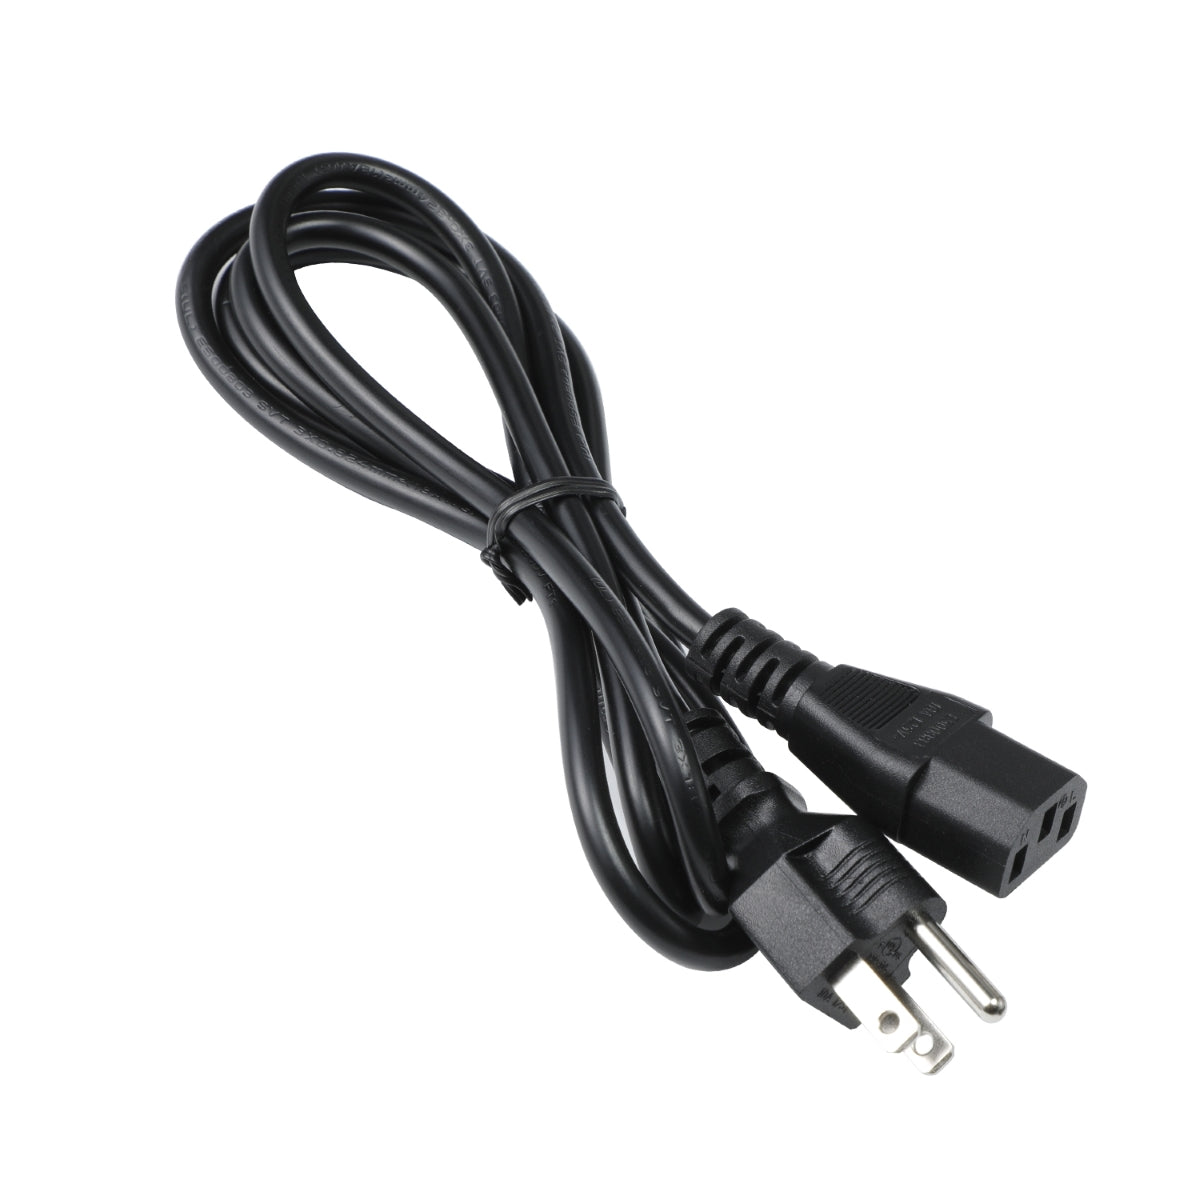 Power Cord for Canon Image Class D1620 Printer